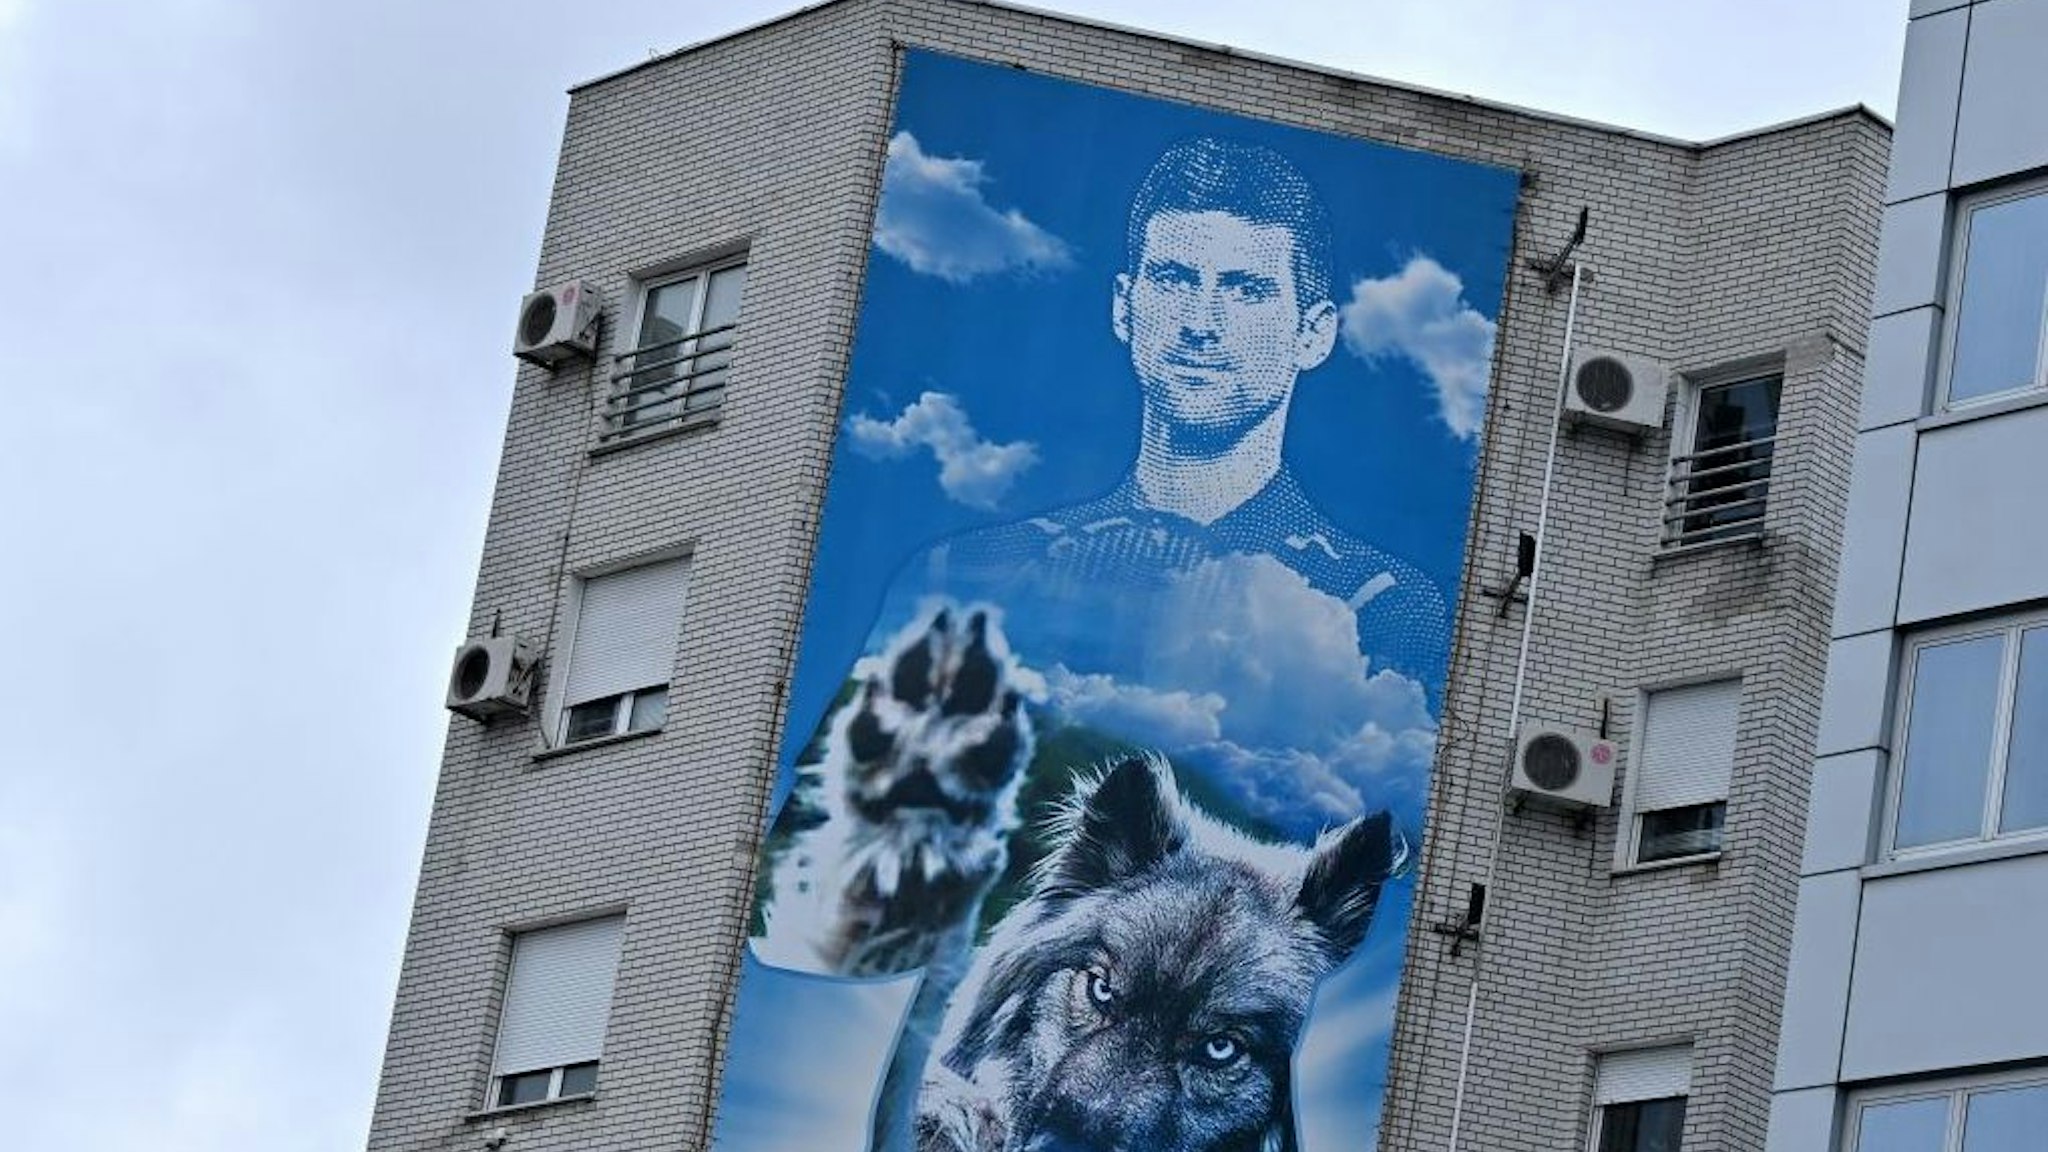 A photograph taken on January 6, 2022 shows a billboard depicting Serbian tennis player Novak Djokovic displayed on the facade of a building, above his restaurant, in Belgrade. - The tennis world number one player is set to spend the night in an immigration detention facility in Australia, after winning a temporary reprieve in his deportation from Australia. The vaccine-sceptic Serb was detained having failed to "provide appropriate evidence" of double vaccination, or a medical exemption needed to enter the country. (Photo by Andrej ISAKOVIC / AFP) (Photo by ANDREJ ISAKOVIC/AFP via Getty Images)